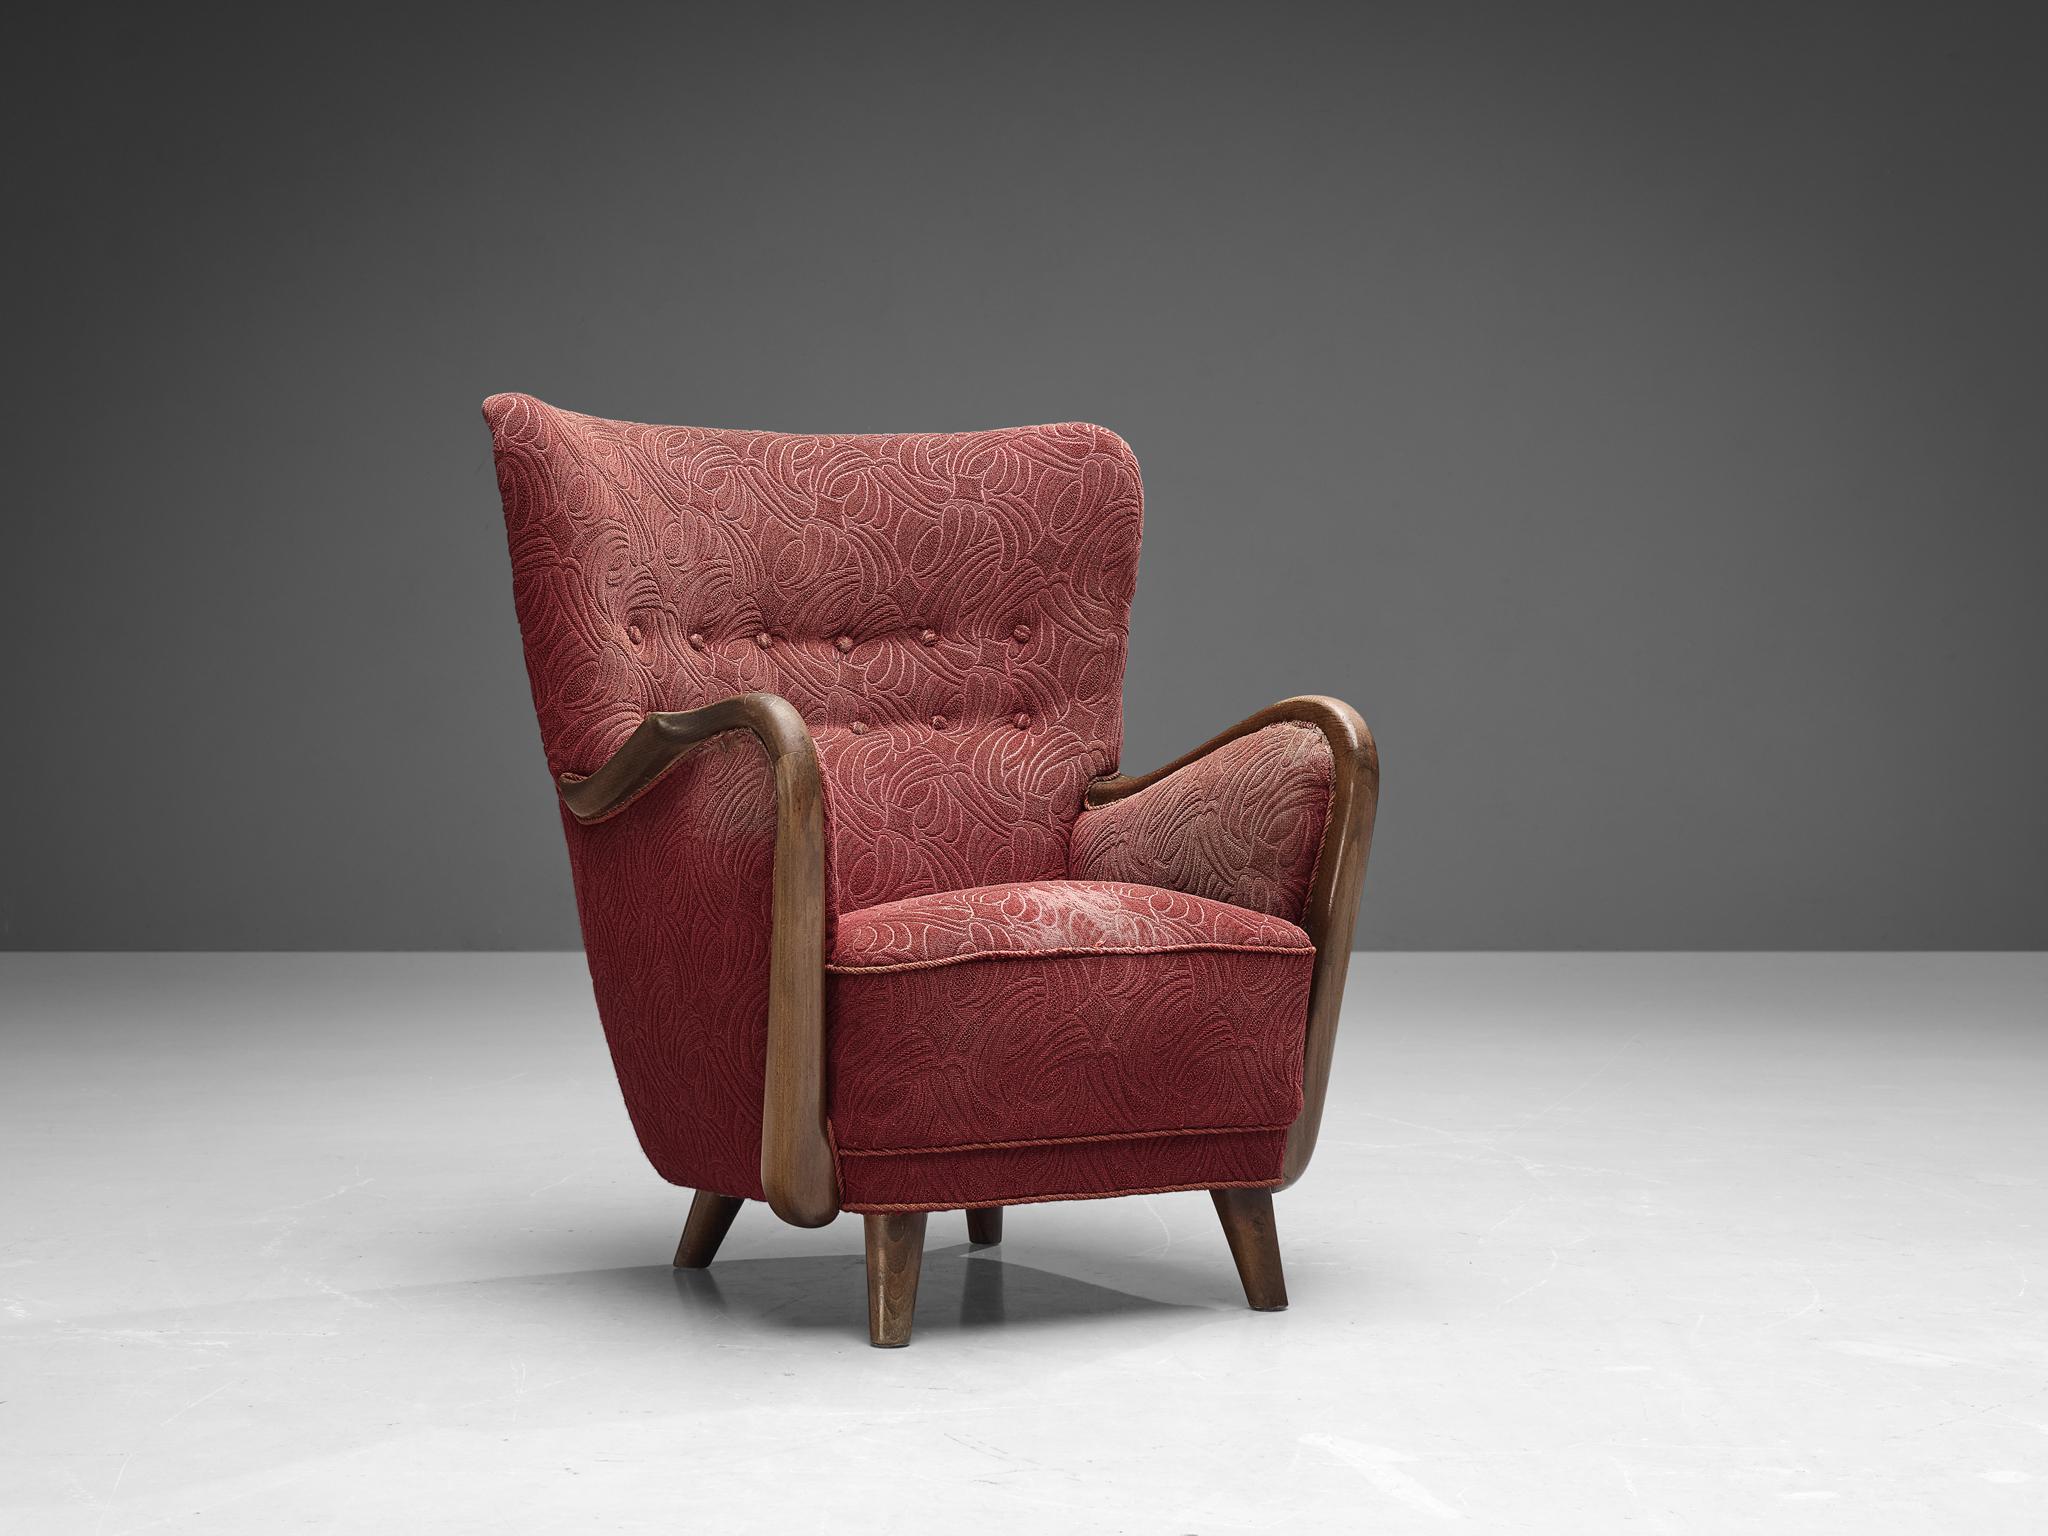 Easy chair, fabric, stained beech, Denmark, 1940s. 

This Danish wingback chair is upholstered with the original fabric that shows signs of age and use. The solid oak frame is sculptural and curved and flows organically into the armrests. The